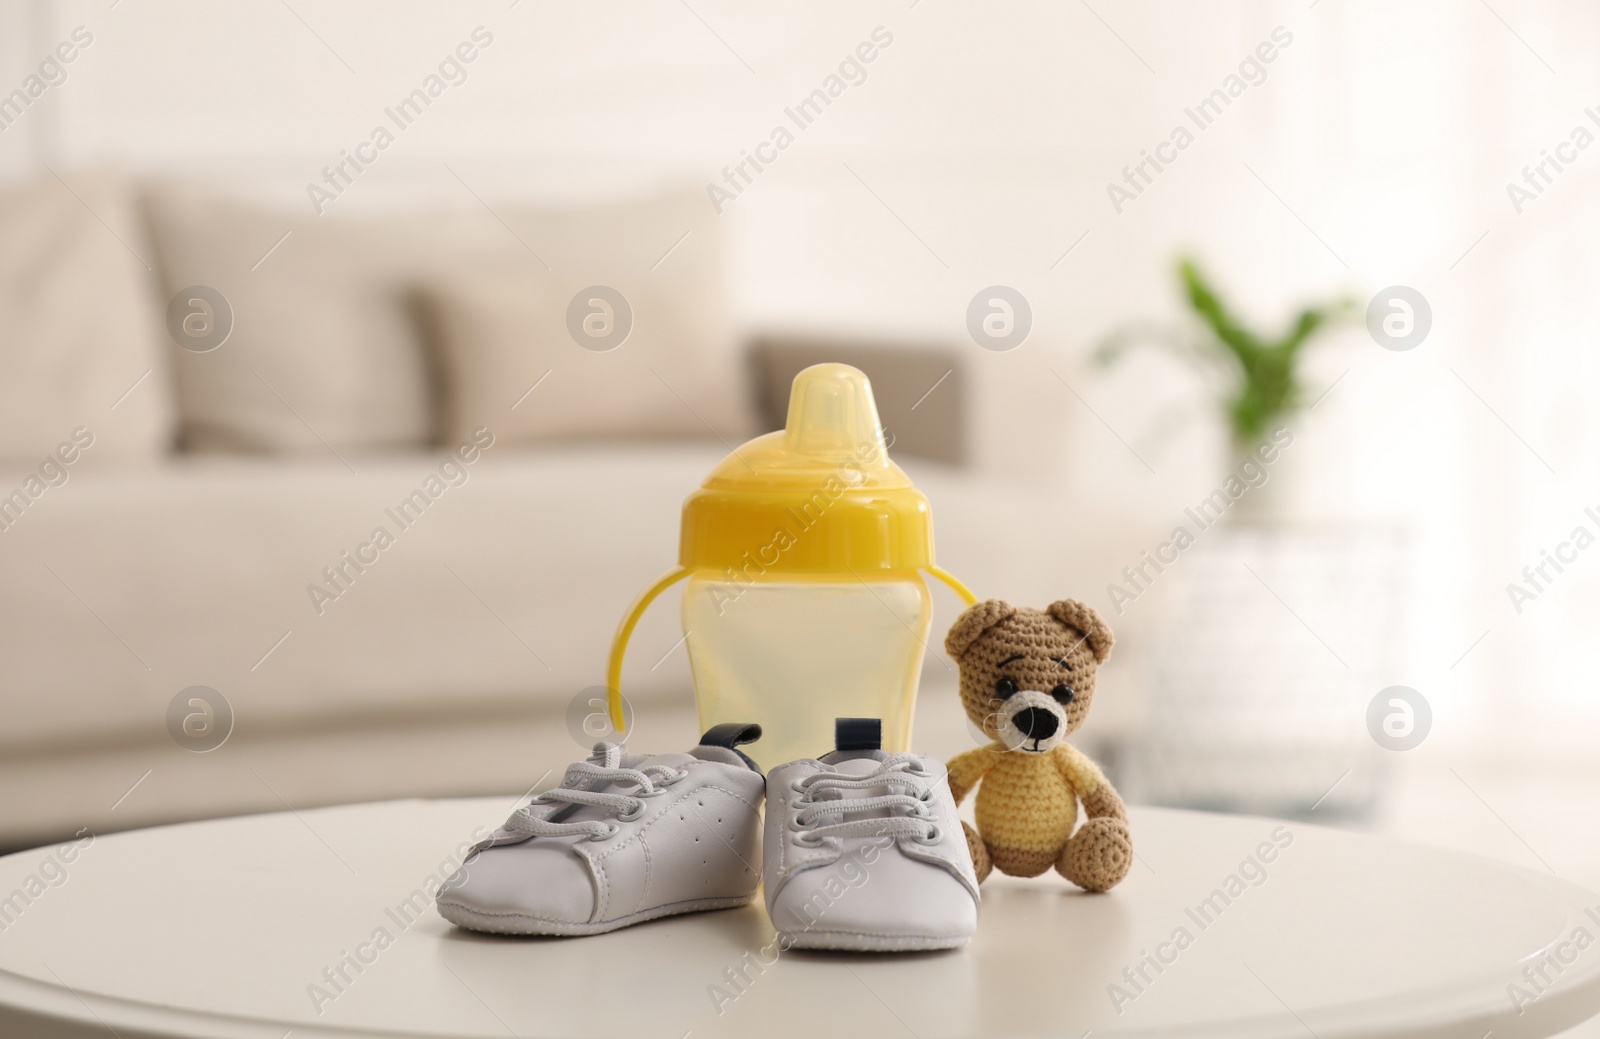 Photo of Baby bottle and shoes near toy bear on white table in room. Maternity leave concept